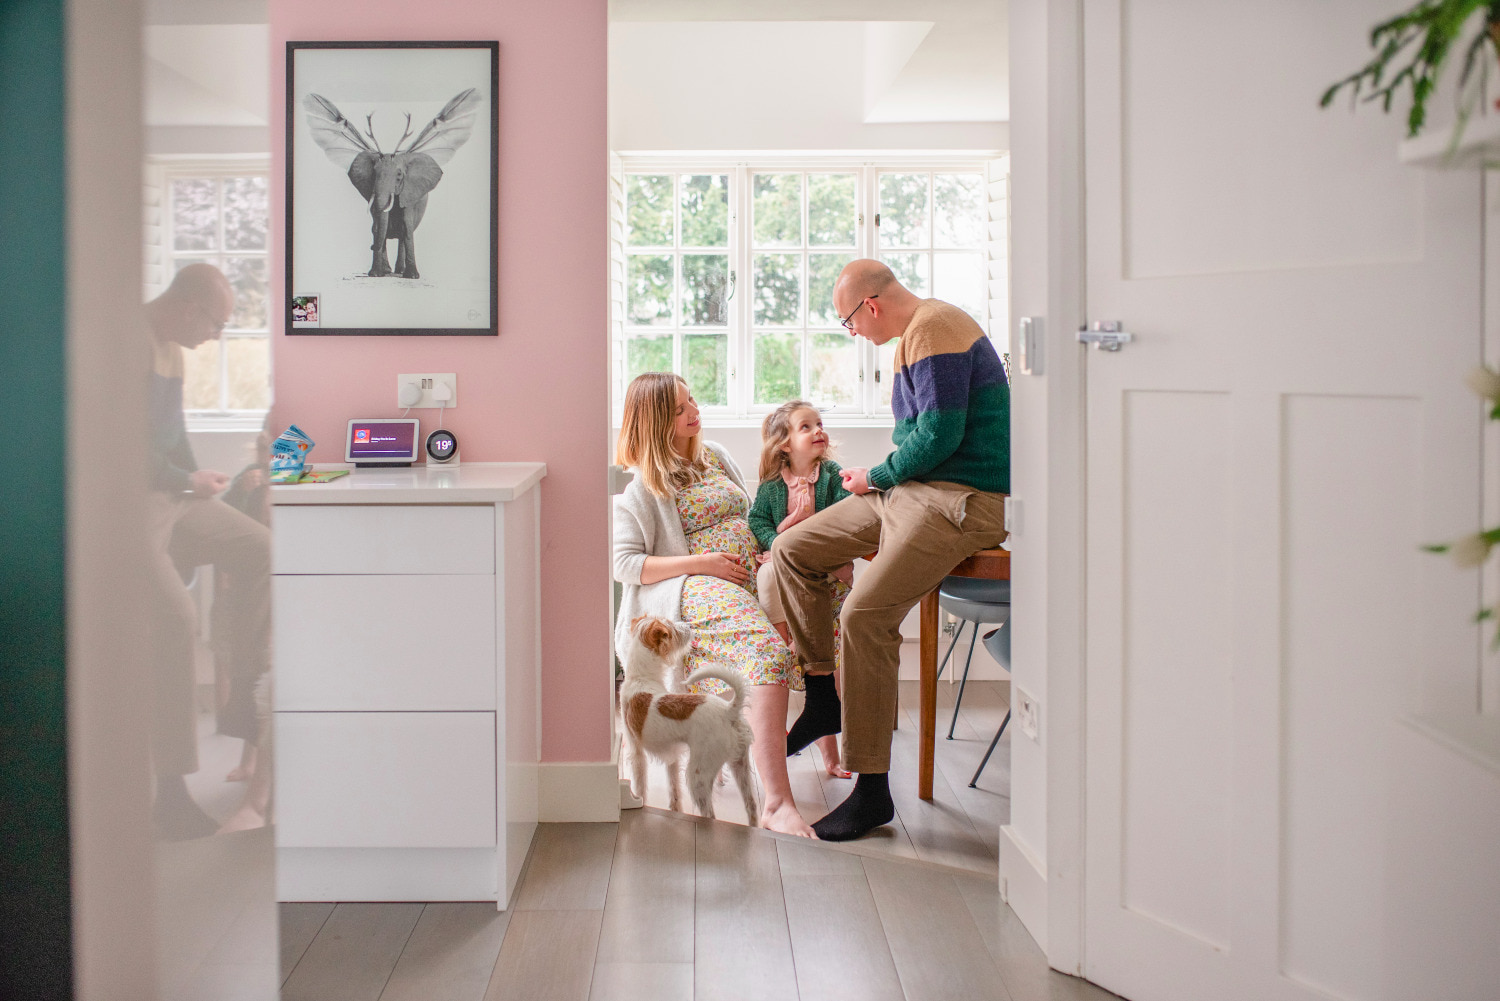 mum and dad with their daughter at their kitchen table during the natural maternity session by agi lebiedz